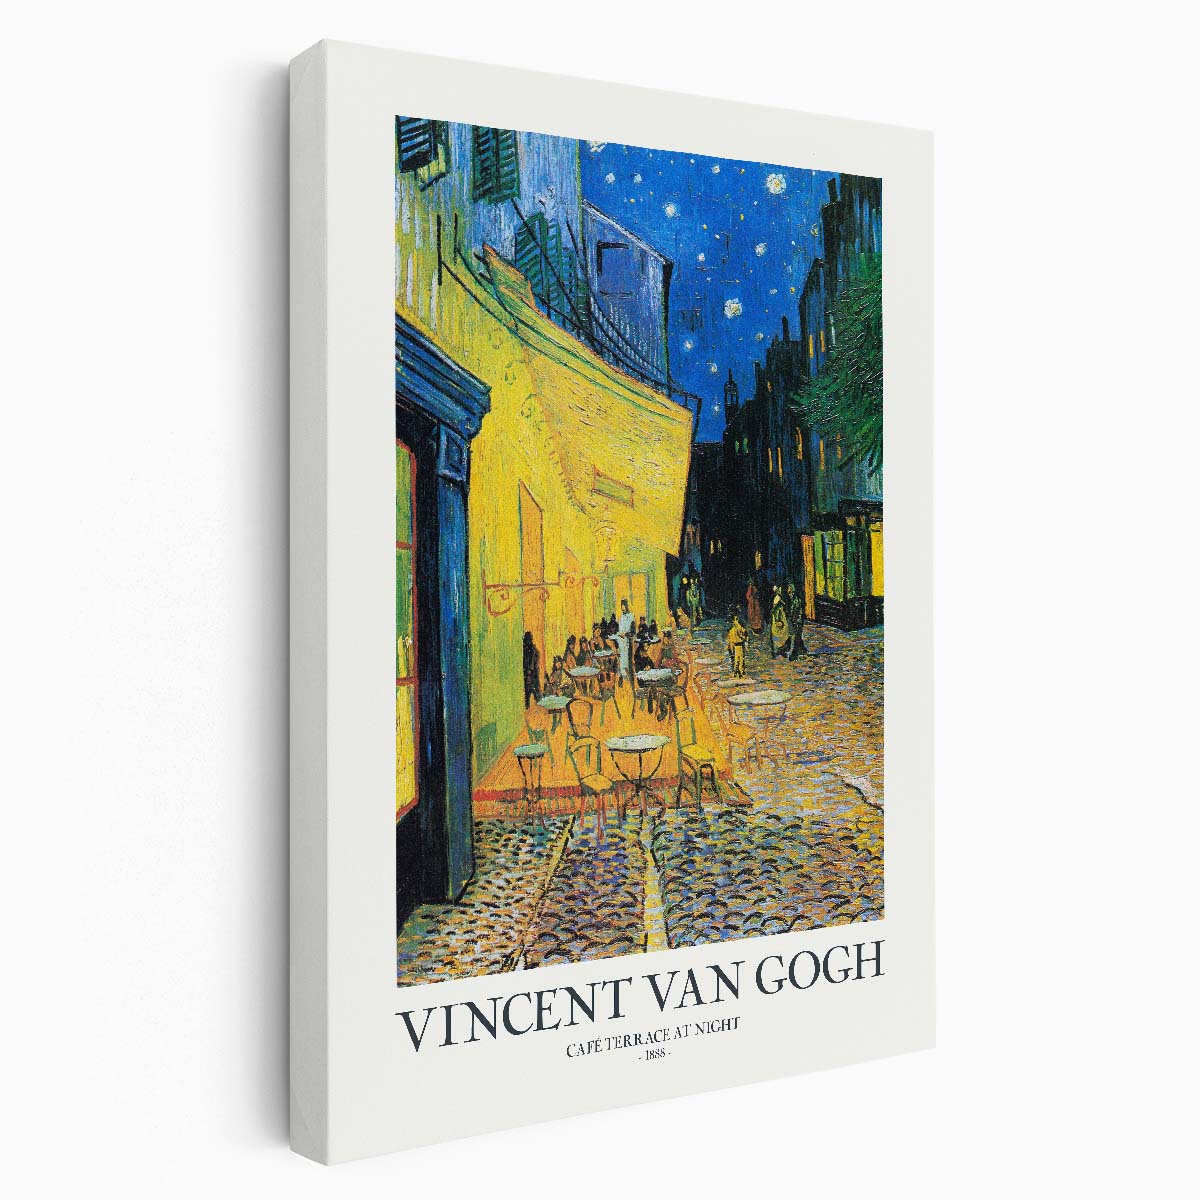 Vincent Van Gogh Cafe Terrace Night Oil Painting Illustration by Luxuriance Designs, made in USA